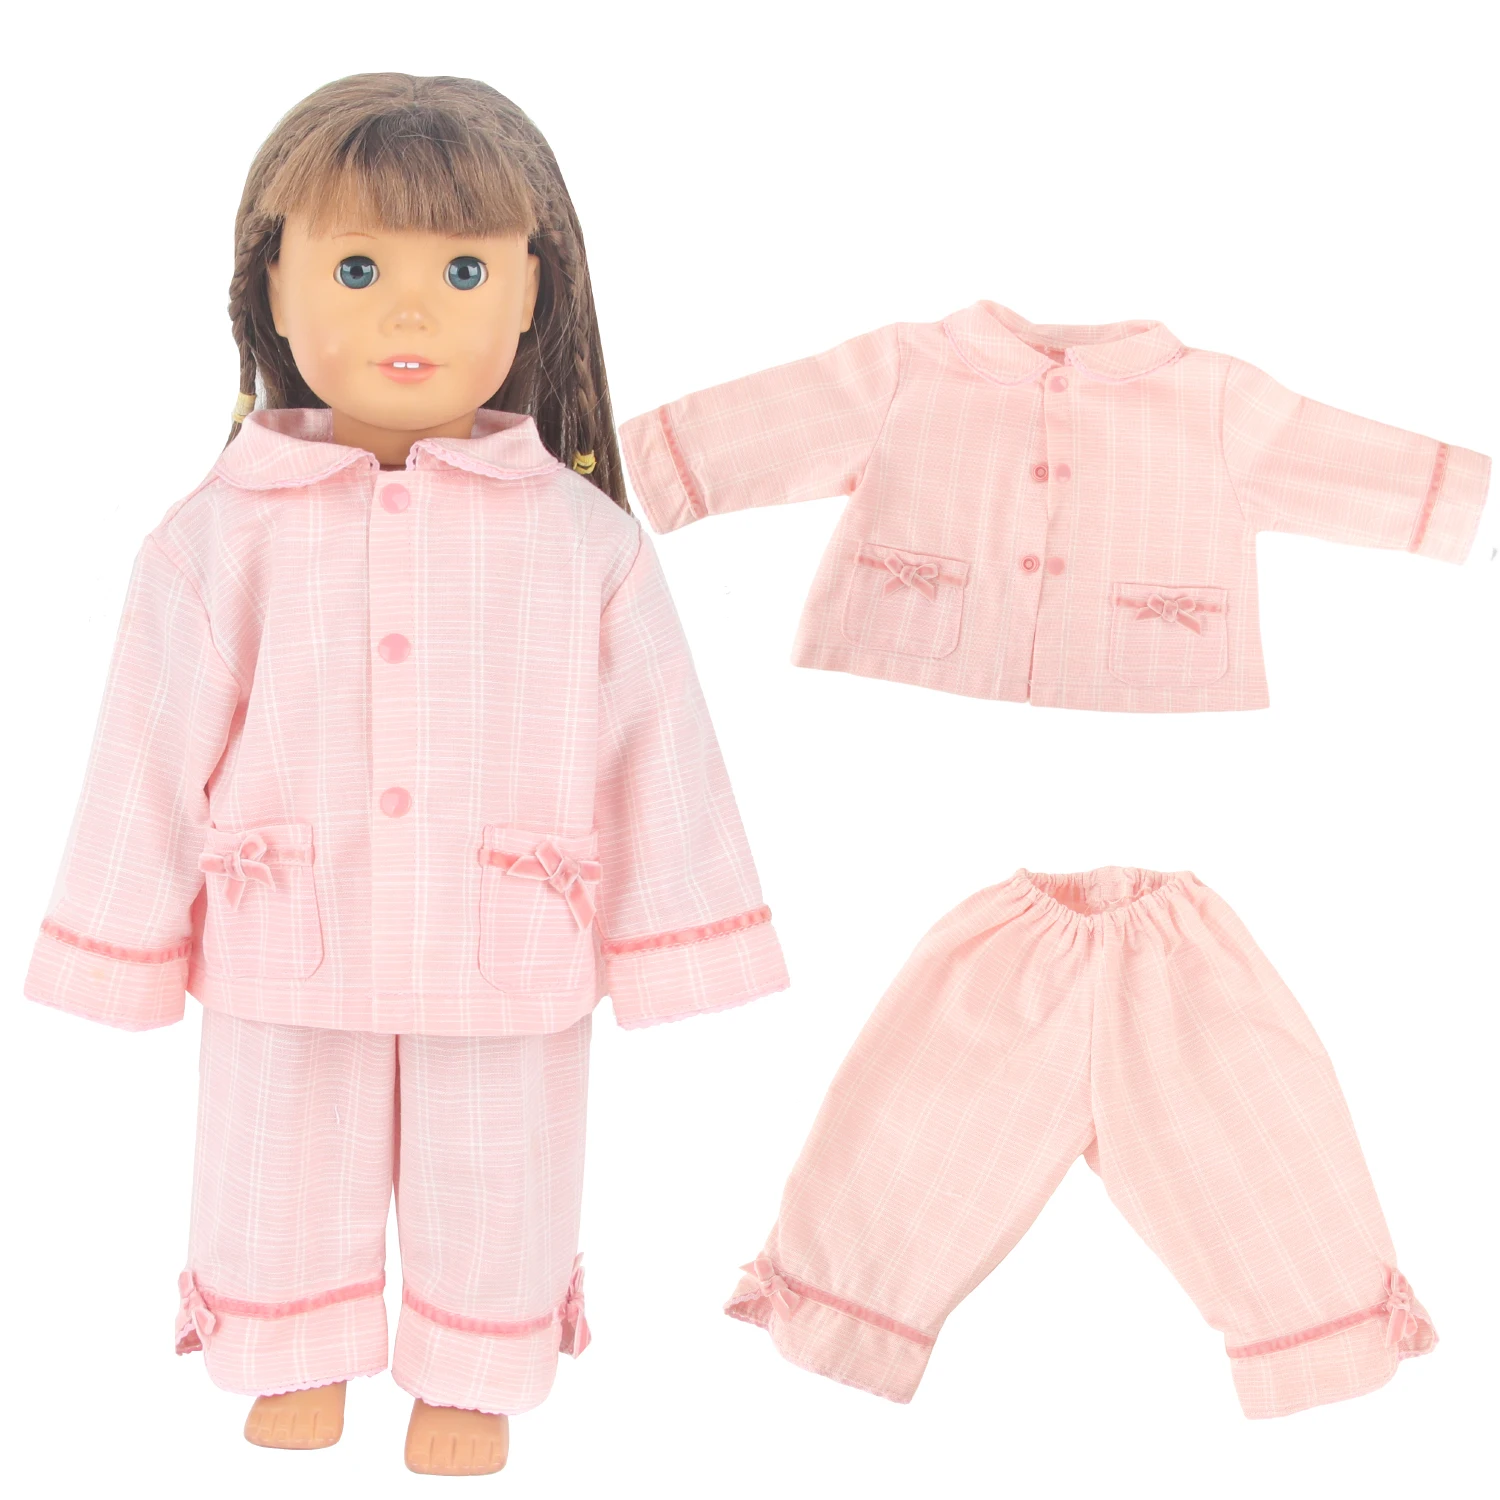 New Pink Bow Knot Doll Clothes Set For 18 Inches American&43cm Baby New Born Dolls,Mini Casual Wear For OG Girl Dolls Toy 25 pink series dress clothes for baby 43cm